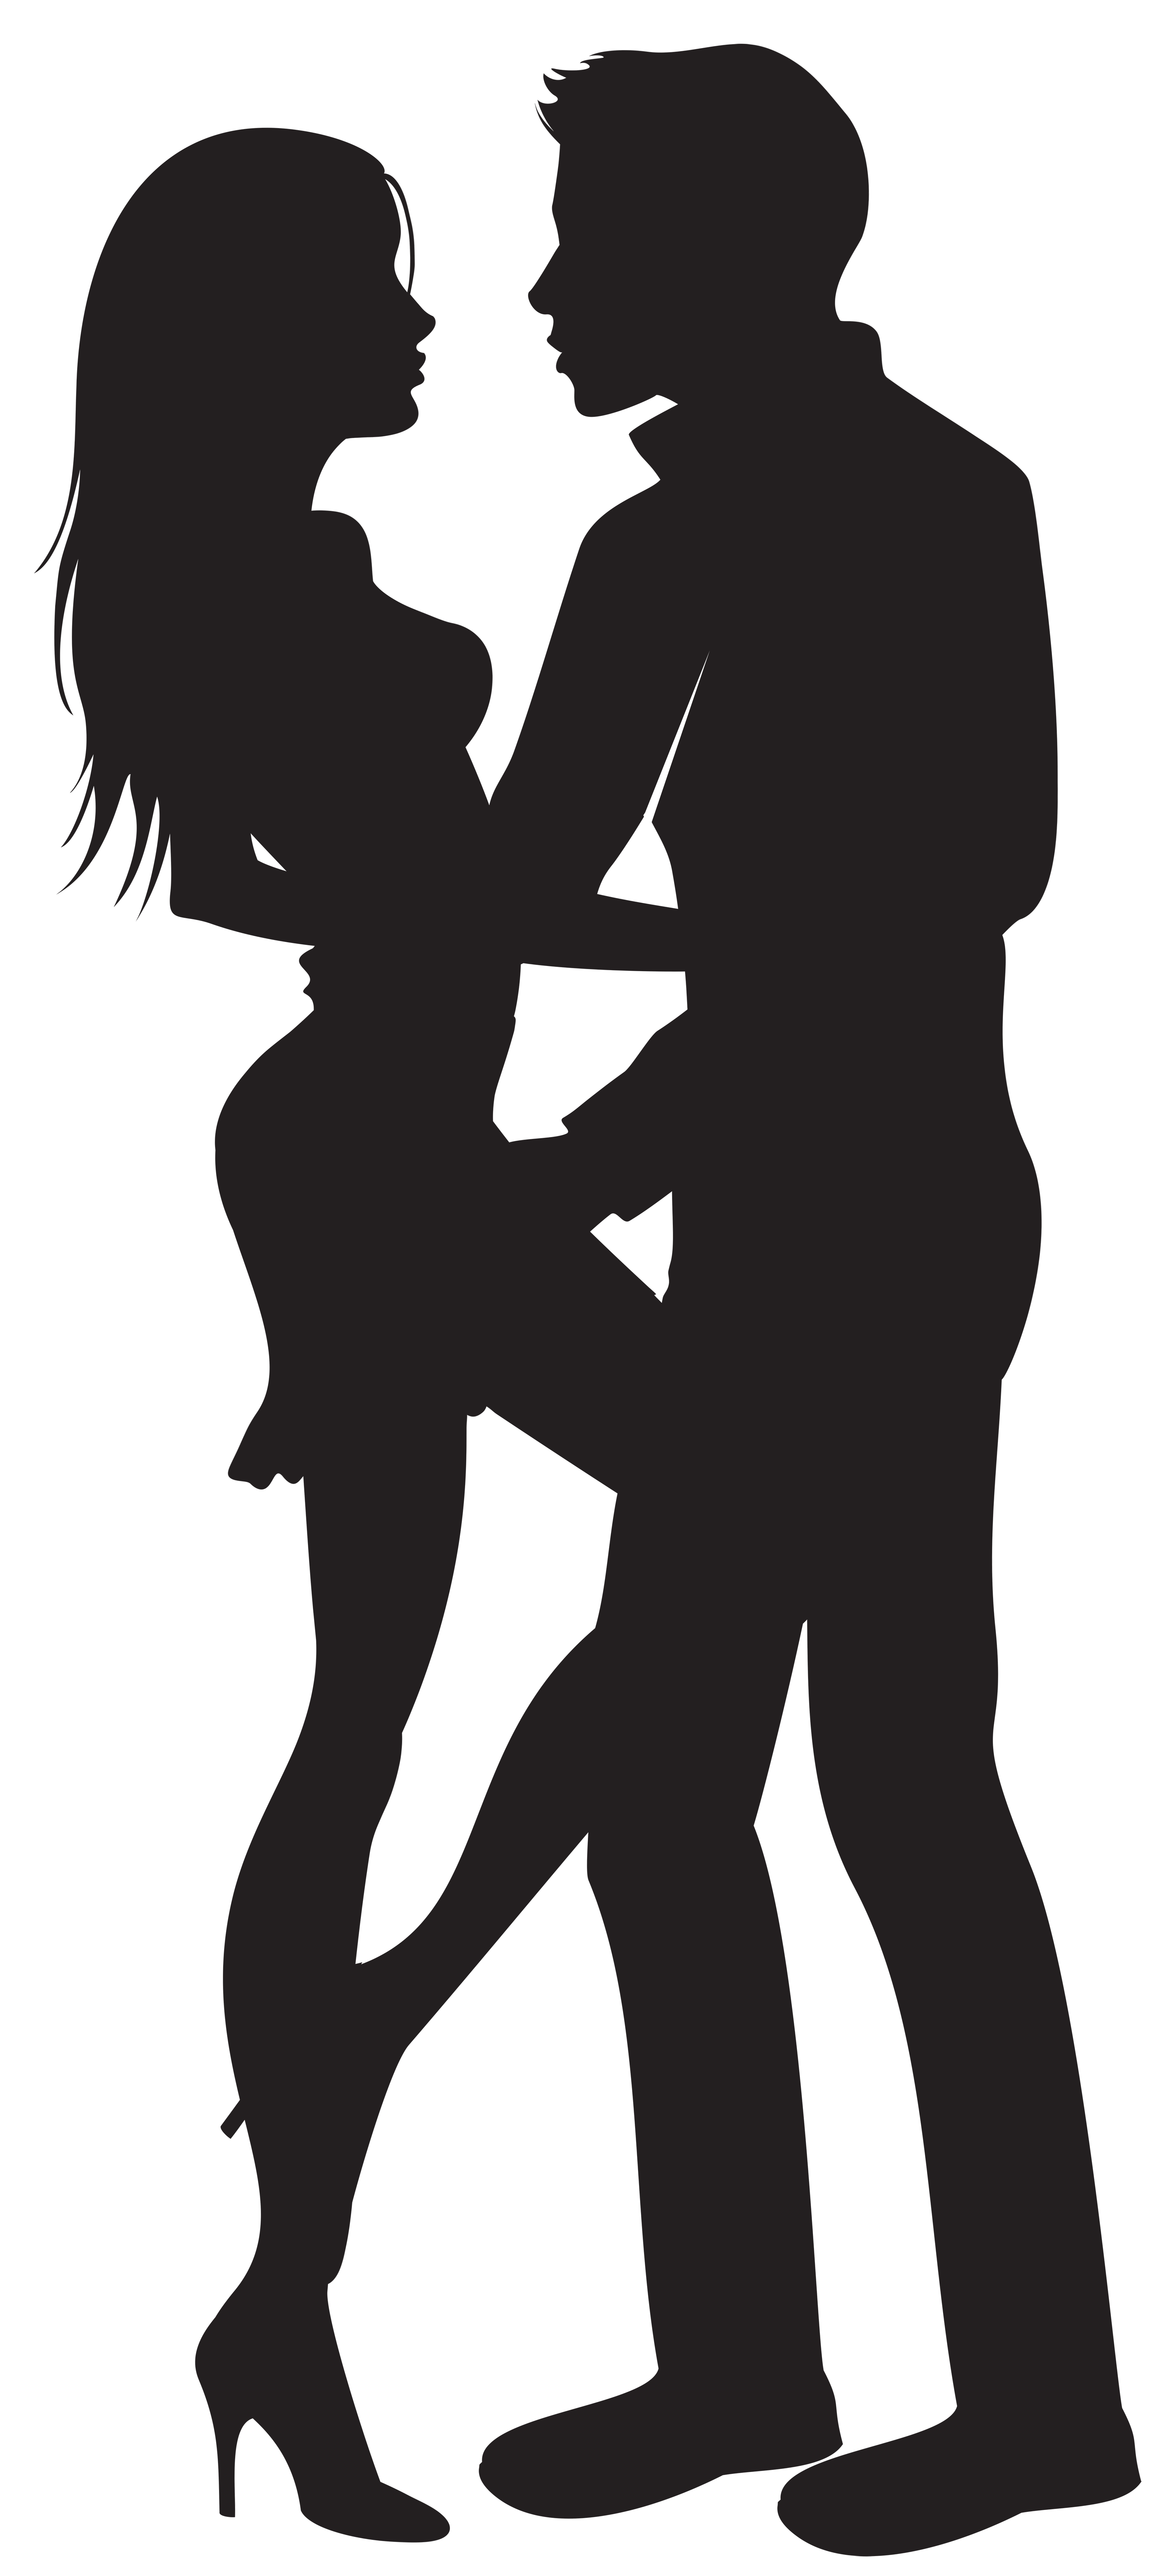 Couple Silhouettes Png Clip Art Image Gallery Yopriceville High